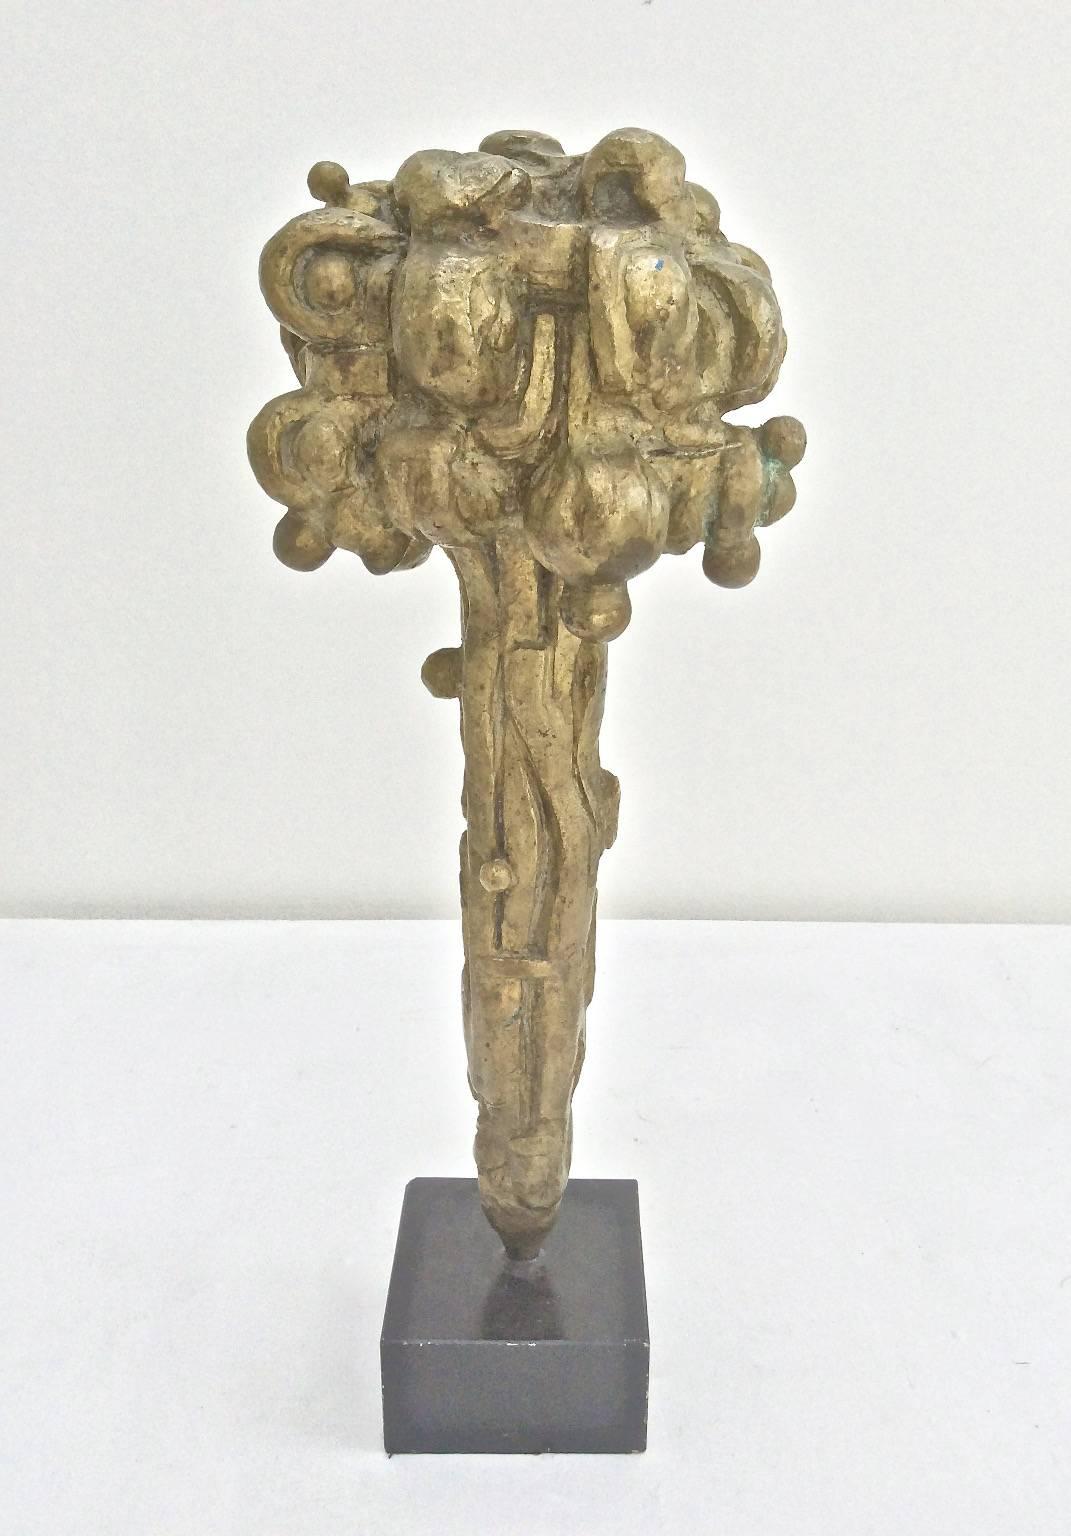 Bronze sculpture by Yannis Parmekelis (1932 - ) signed and dated 1975. 

The piece is illustrated by the Contemporary Greek Art Institute under the title Bouquet, a recurring theme in his work, and is numbered edition 4 of 30.

Yannis Parmakelis